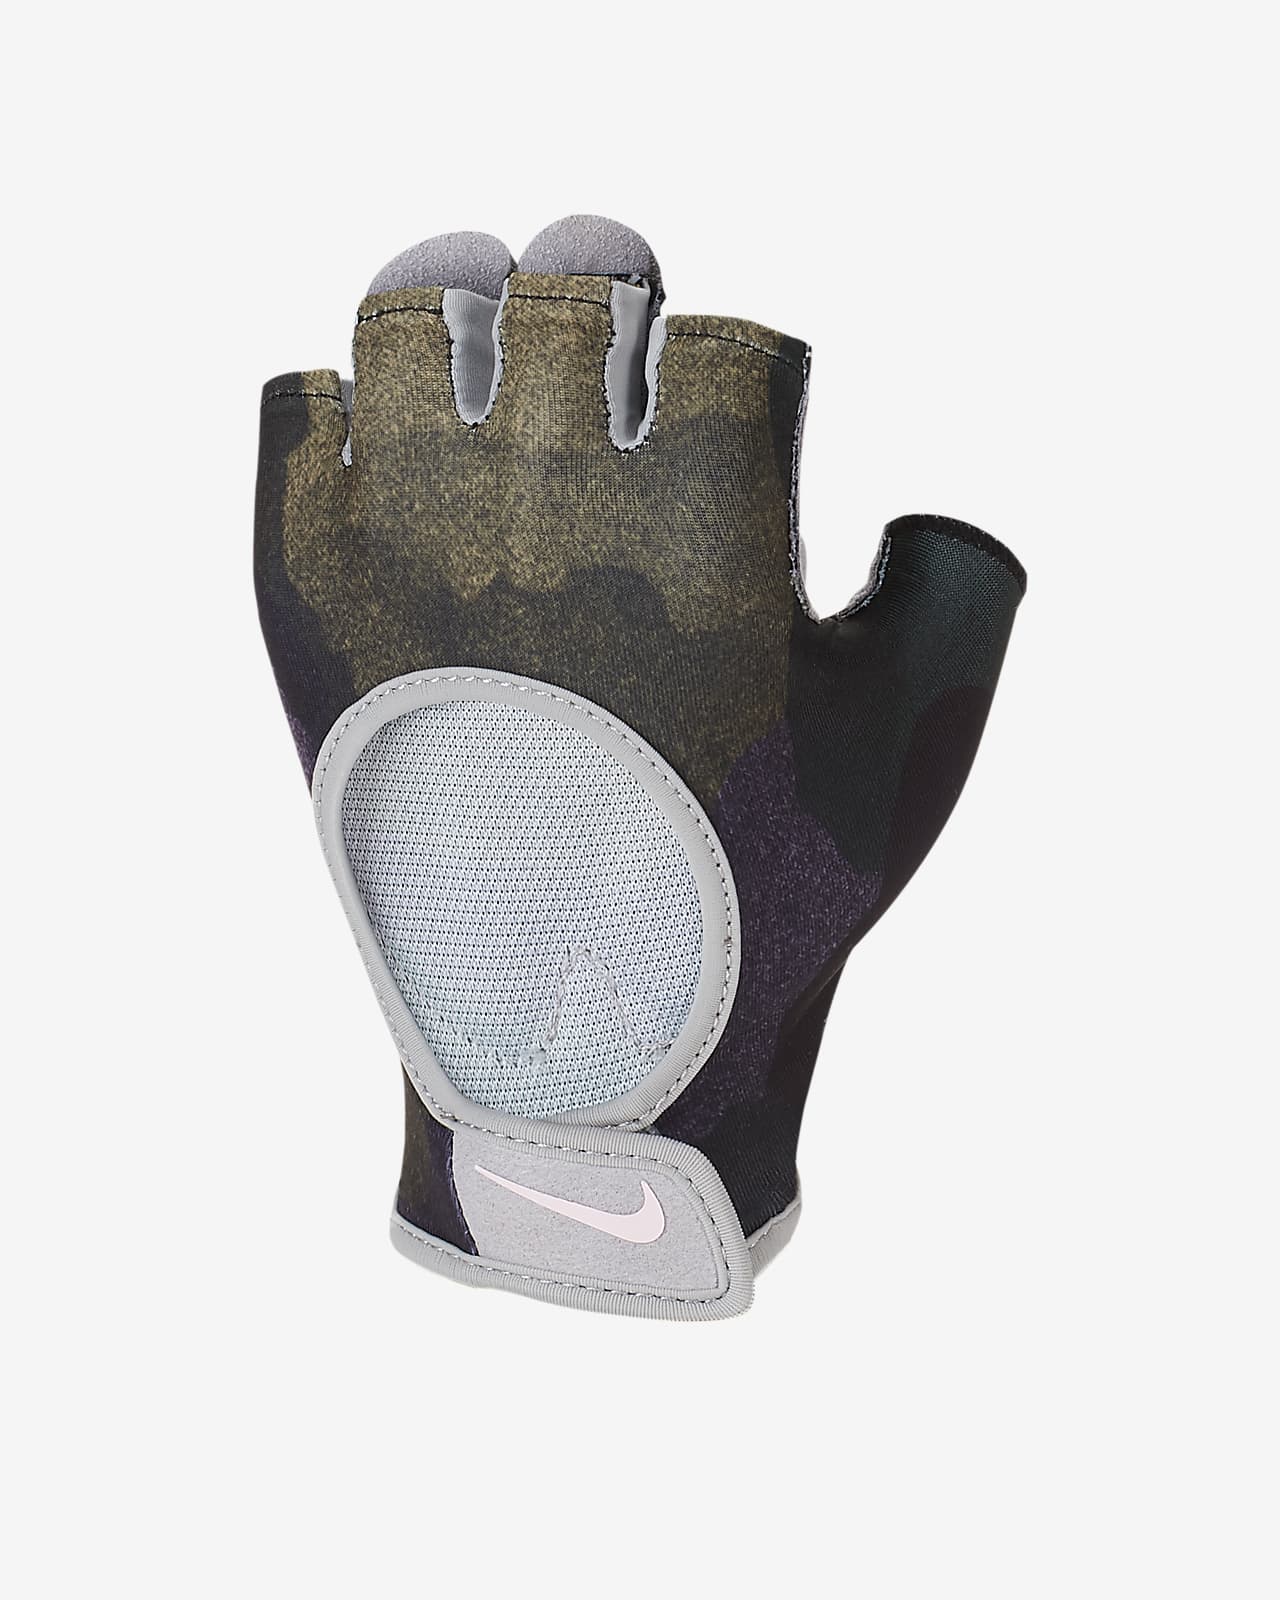 nike women's gym ultimate fitness gloves